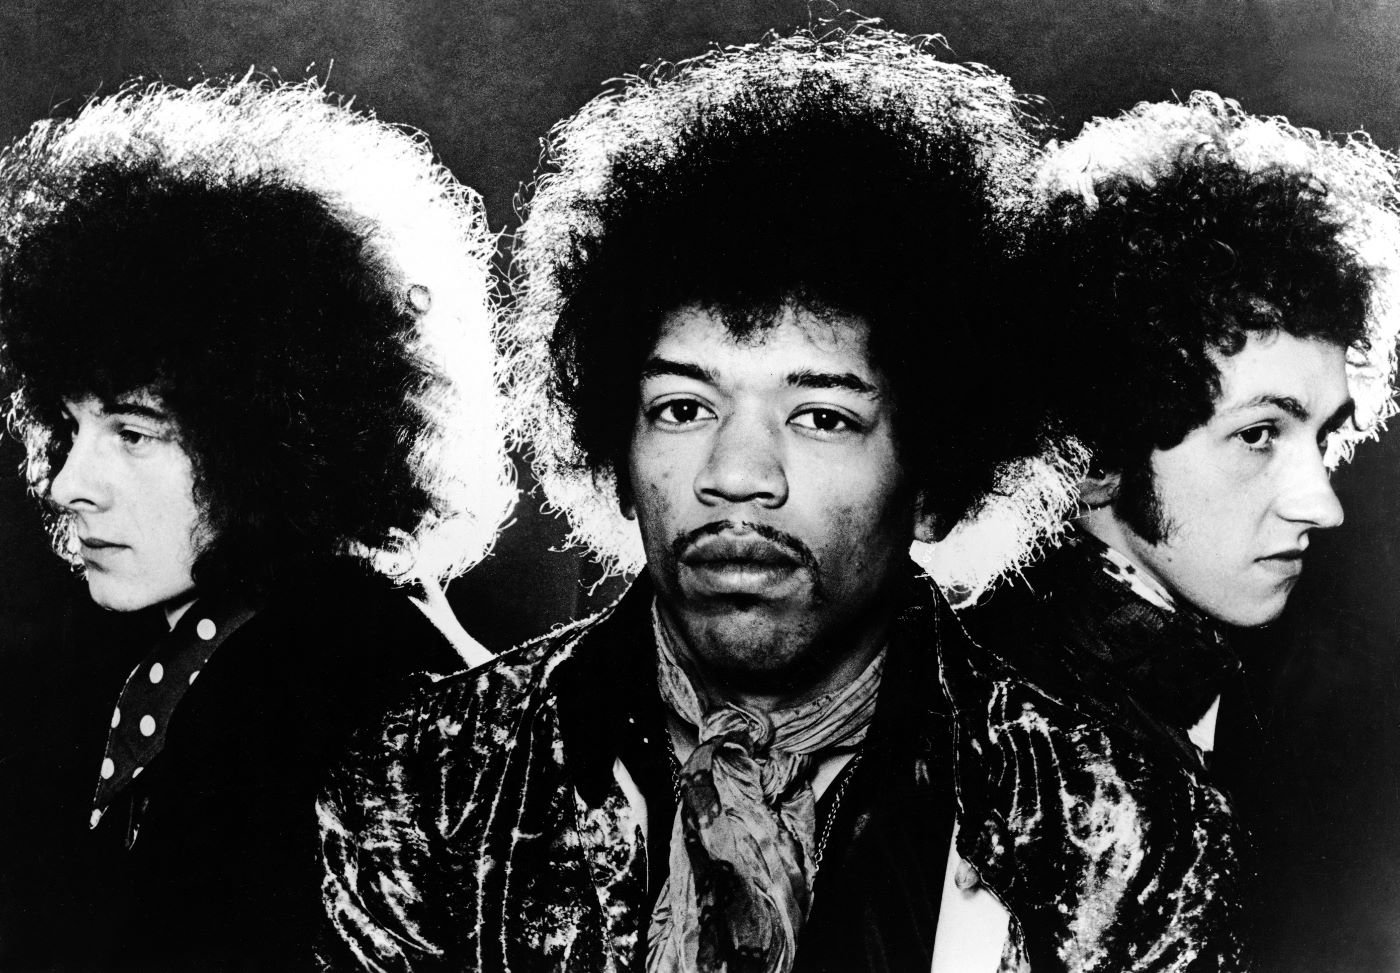 The Jimi Hendrix Experience with Noel Redding, Jimi Hendrix, and Mitch Mitchell in front of a black background.